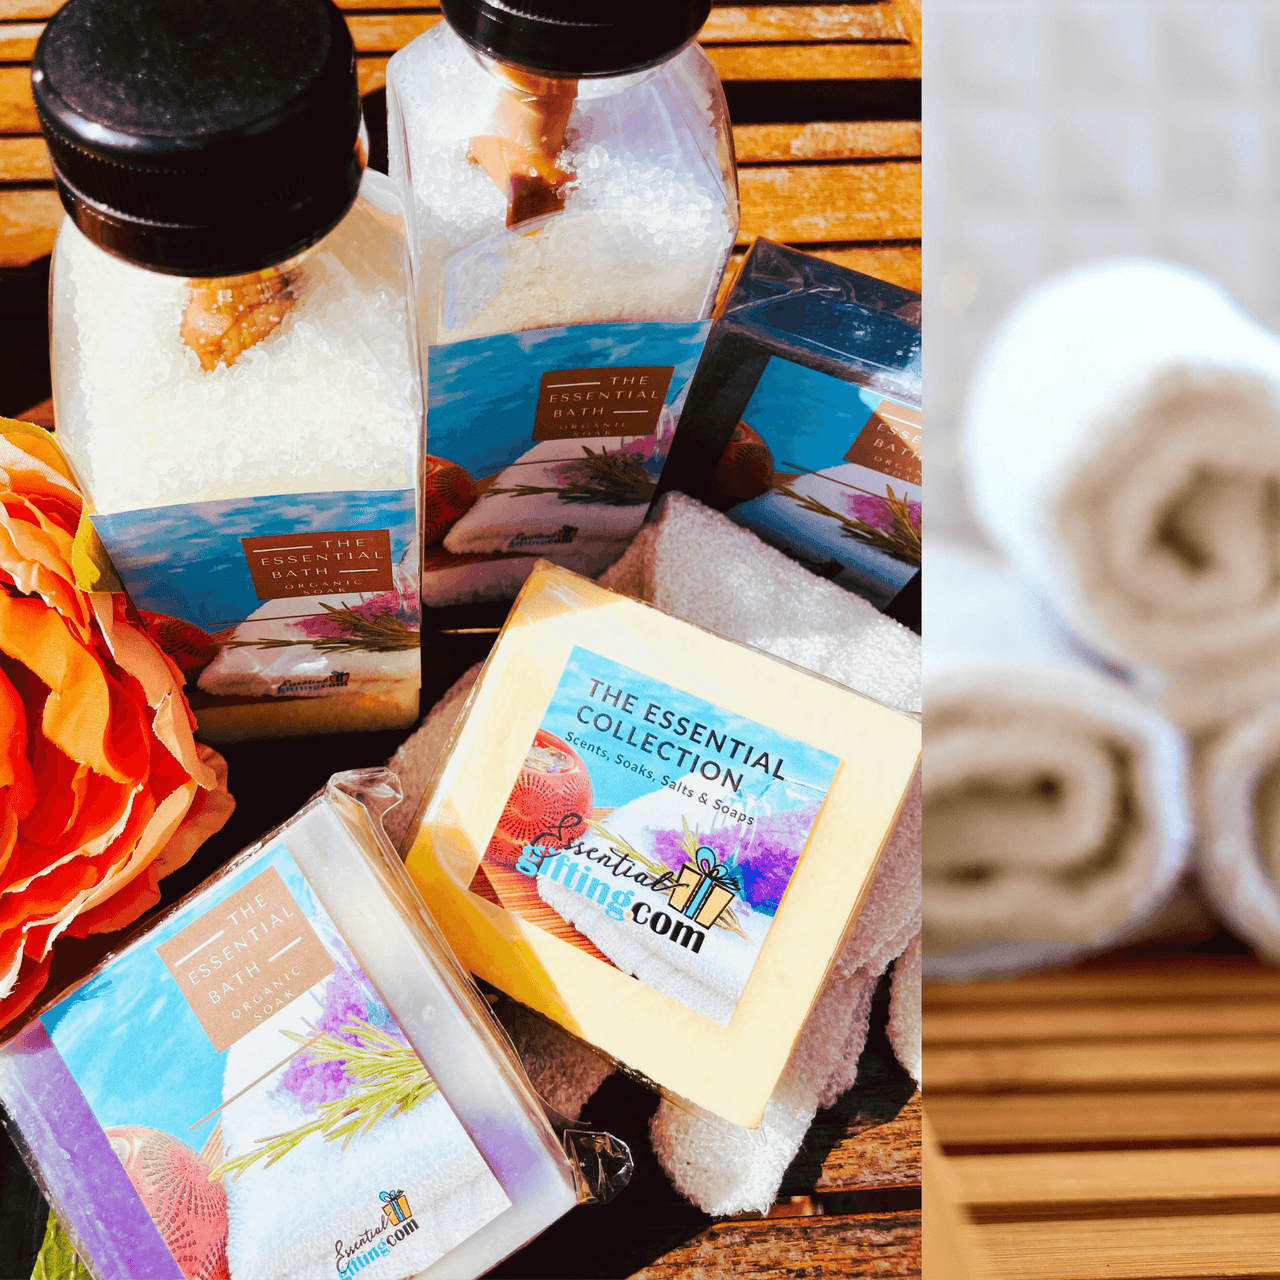 Luxurious bath essentials with natural ingredients, packaged in a rustic gift box, surrounded by plush towels and a vibrant flower, creating a relaxing spa-like atmosphere.